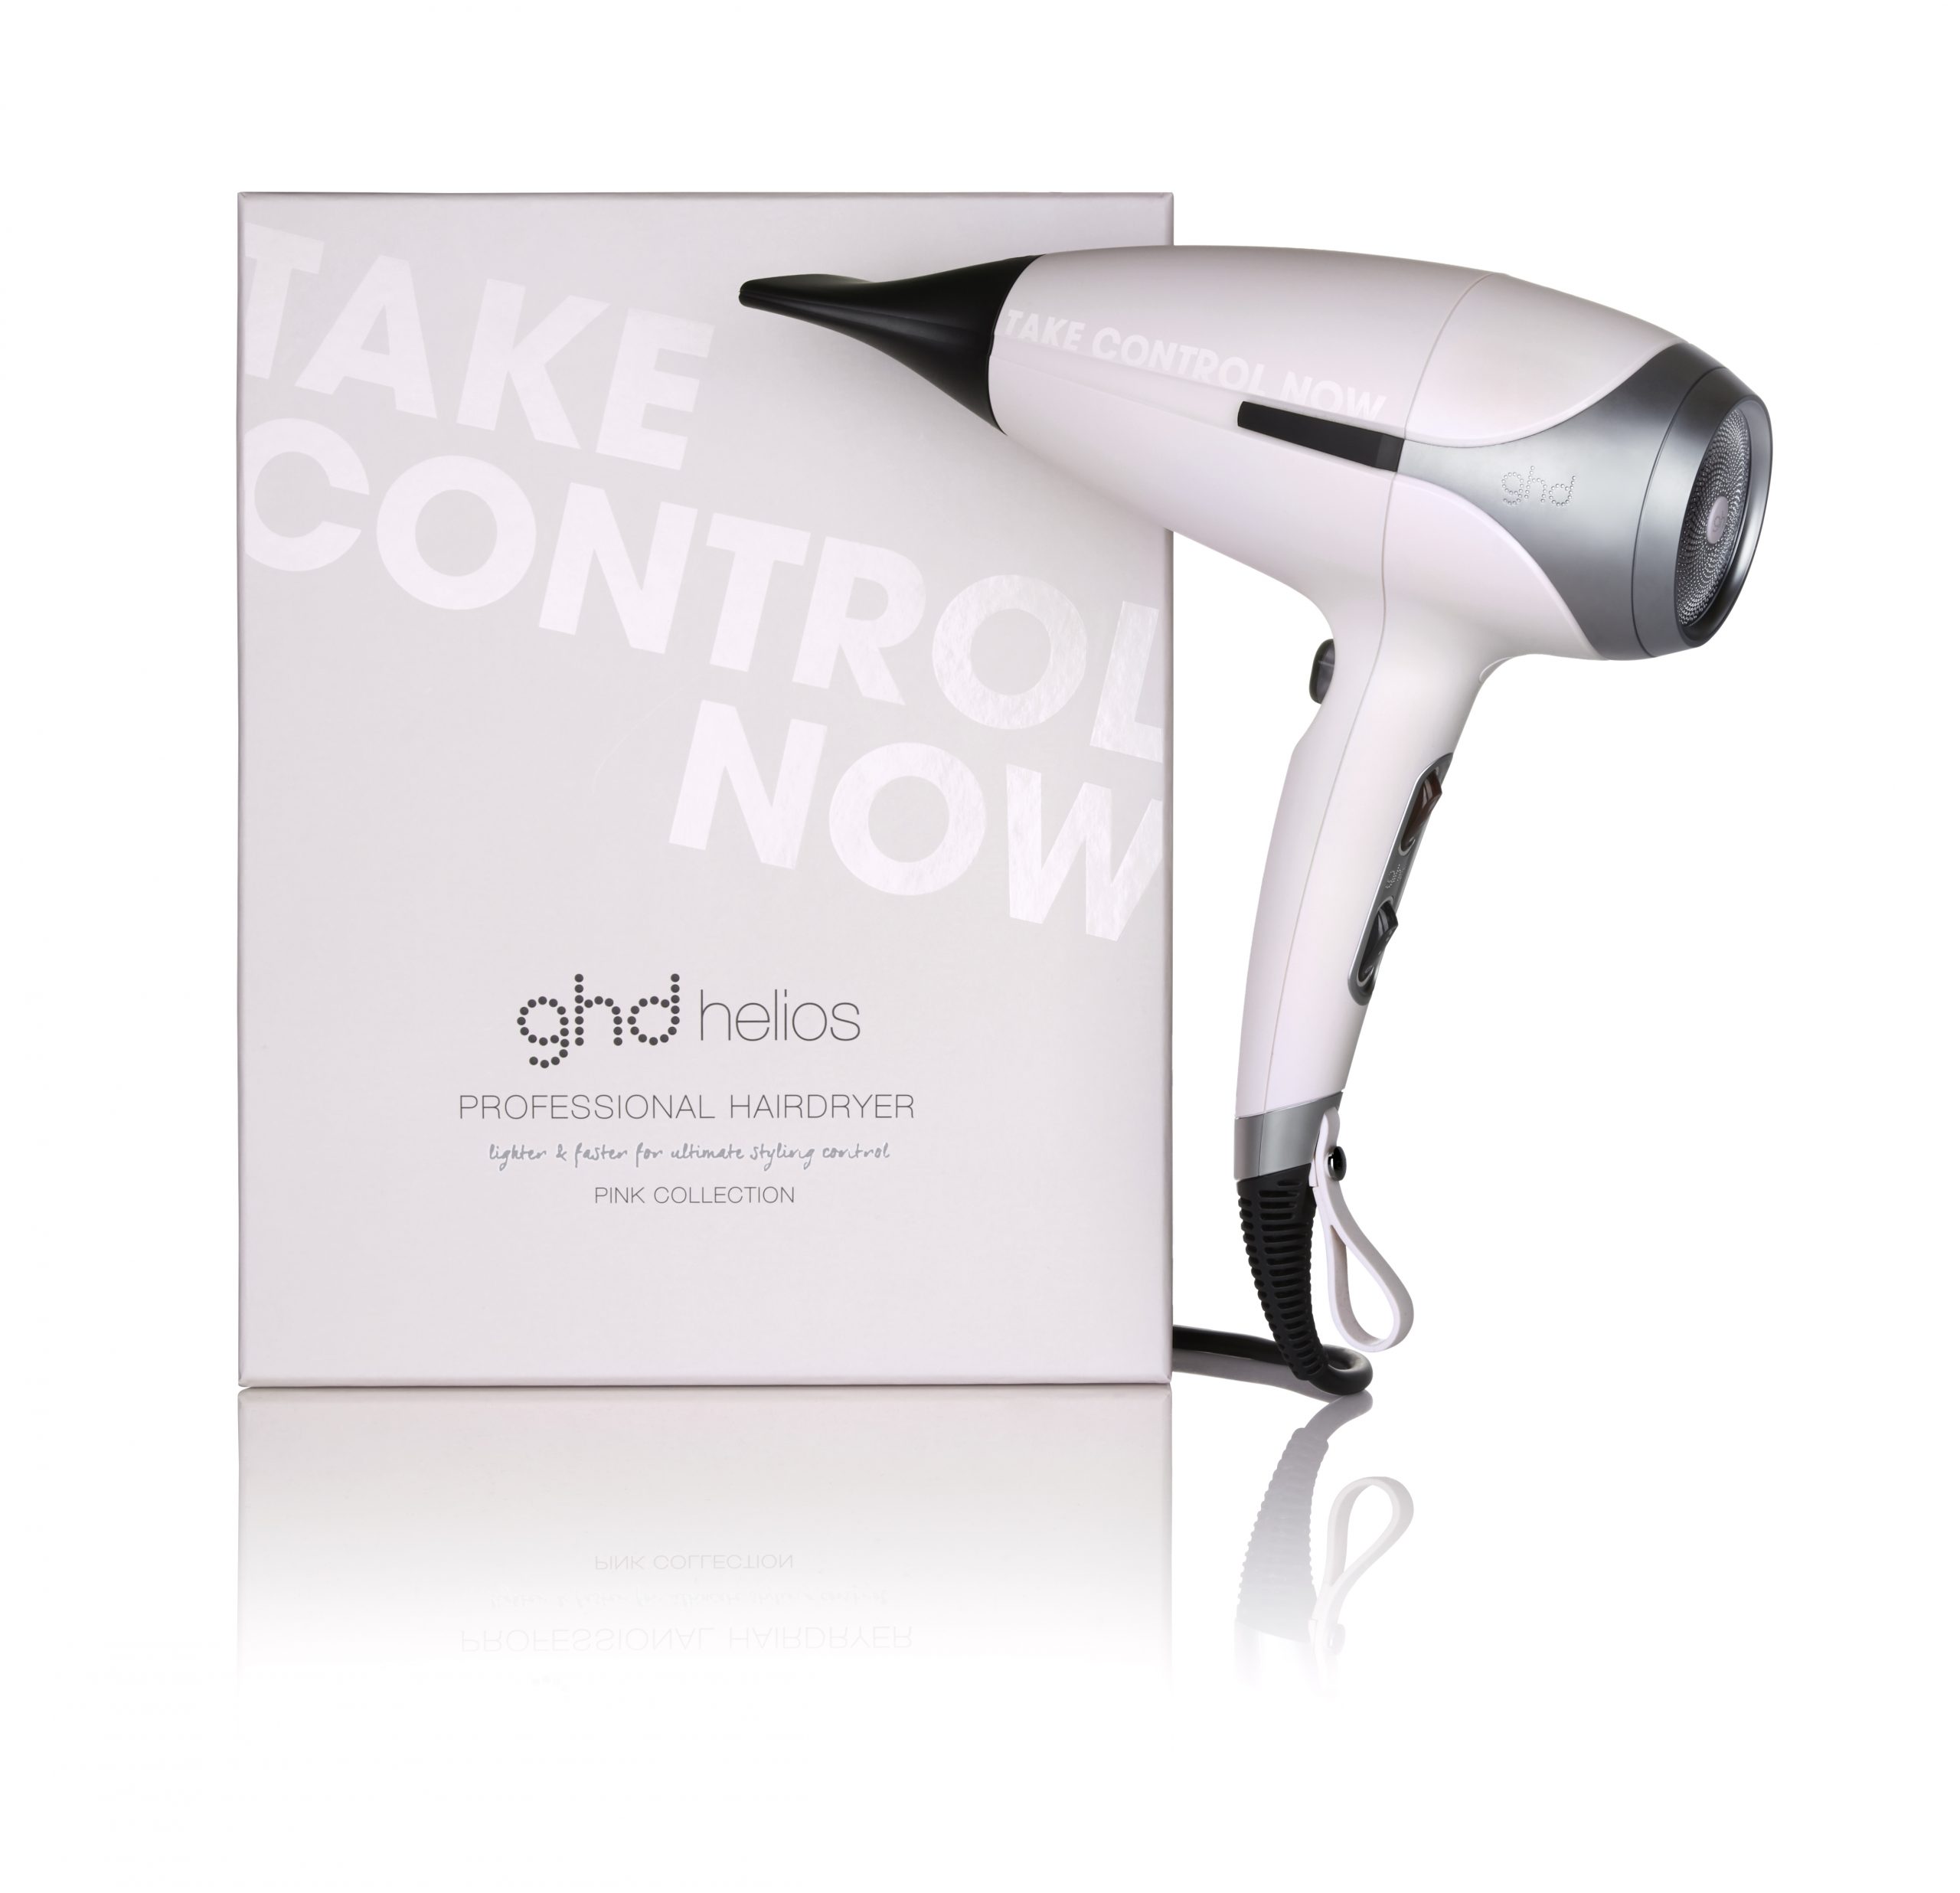 ghd Pink_helios hairdryer_Campaign Imagery_RRP $330